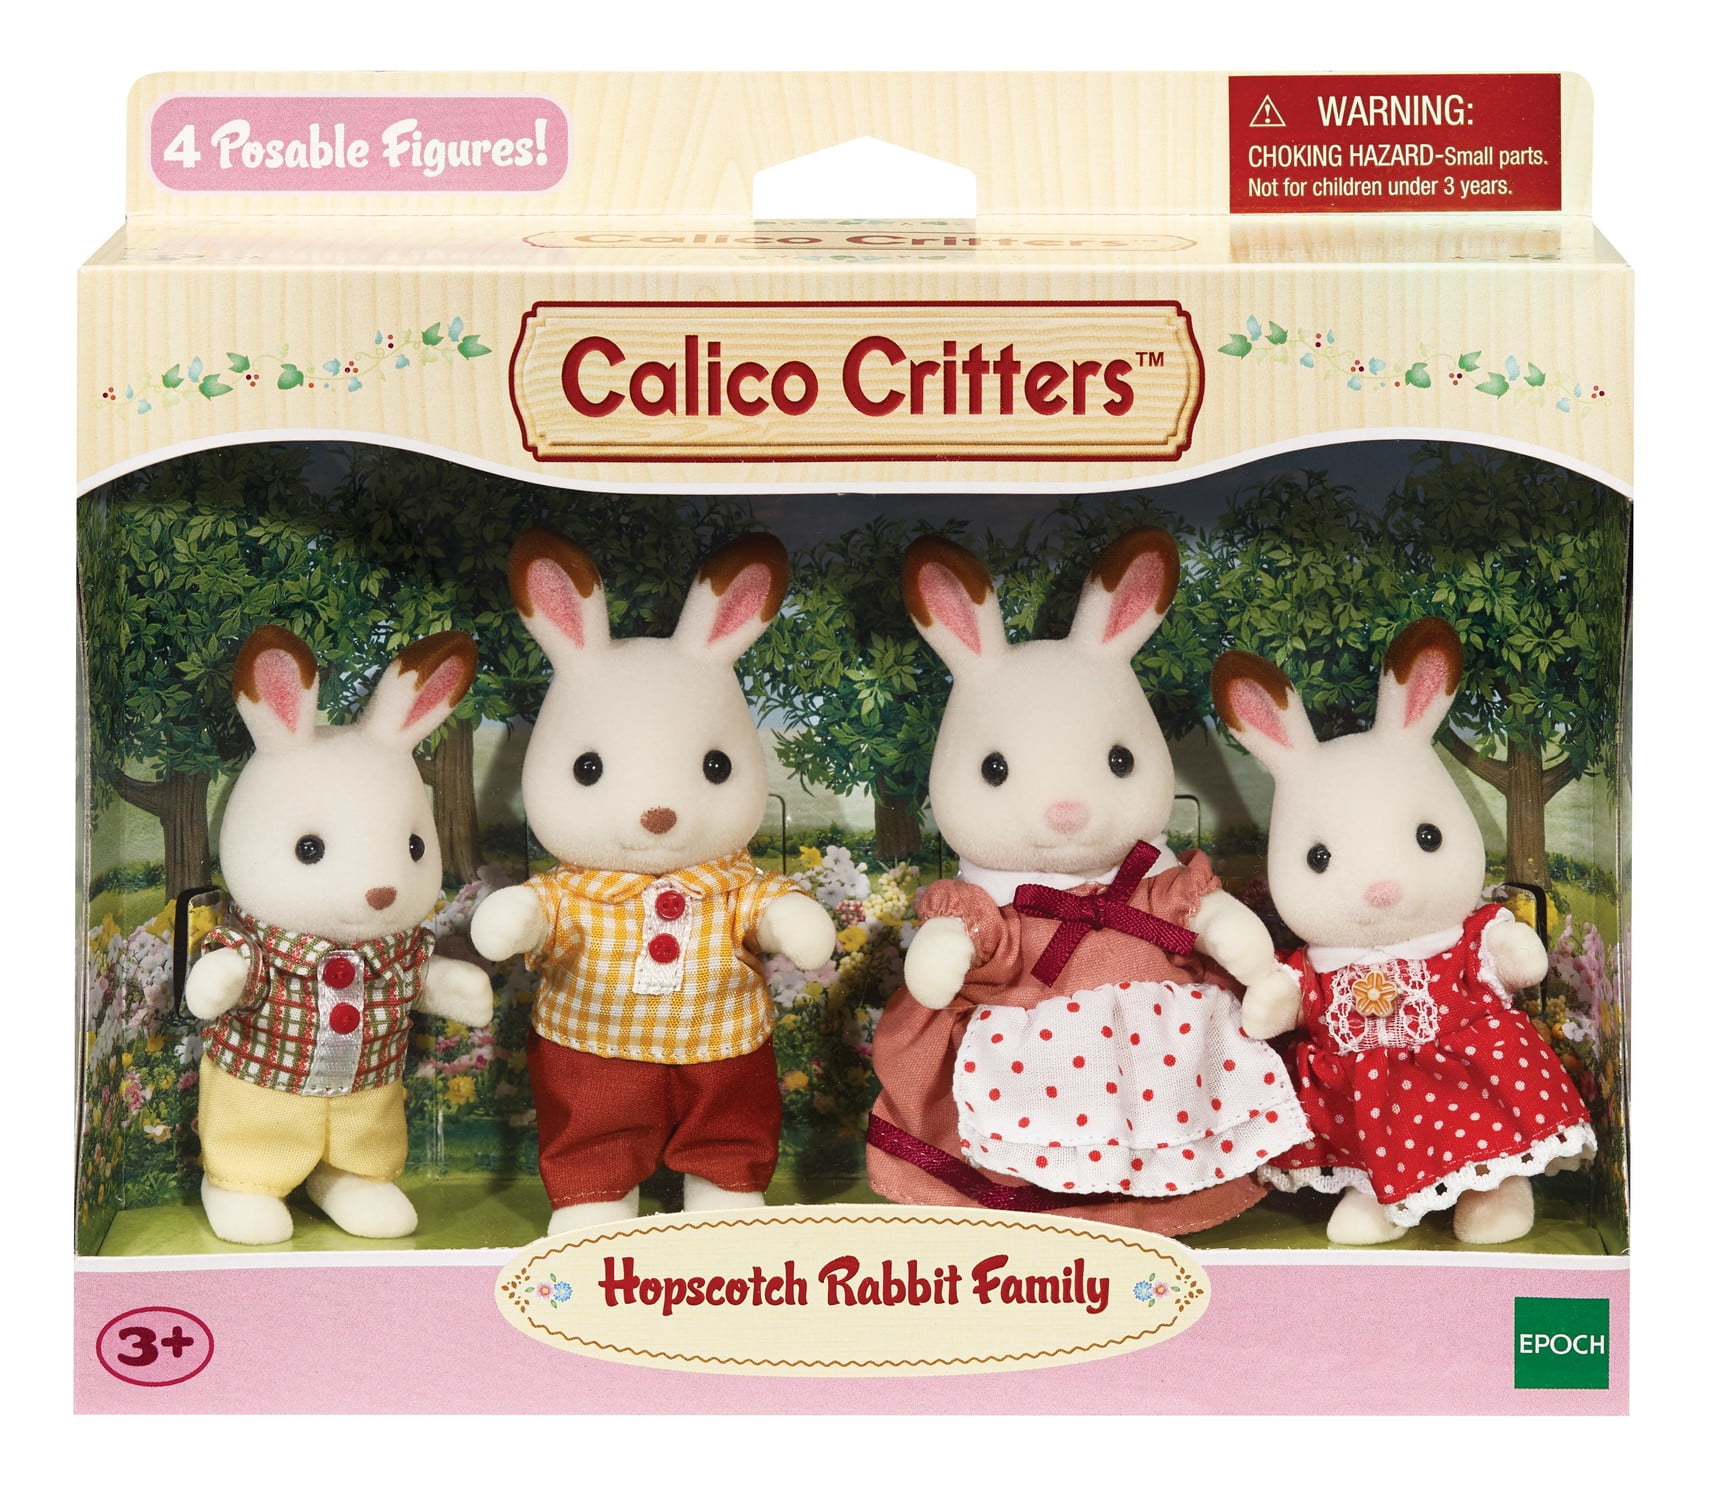 Calico Critters Hopscotch Rabbit Family for sale online 